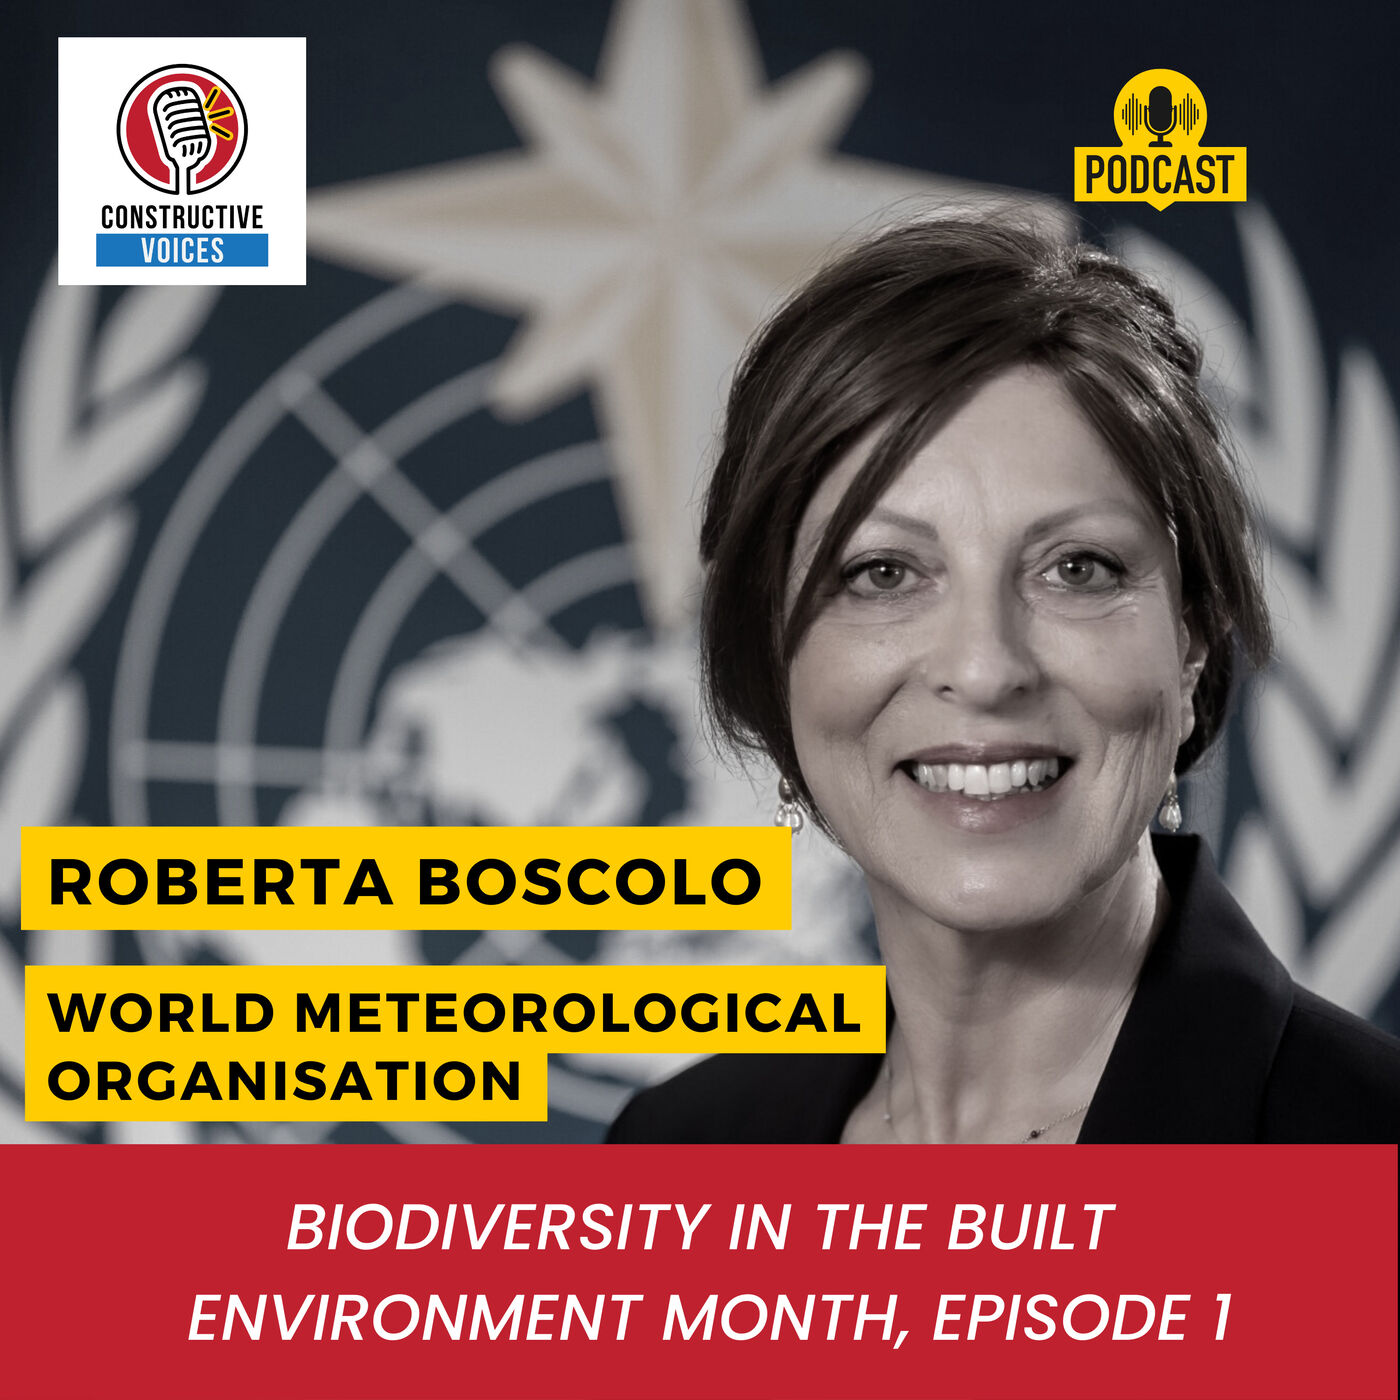 Biodiversity in the Built Environment with World Meteorological Organisation Climate & Sustainability Influencer, Roberta Boscolo